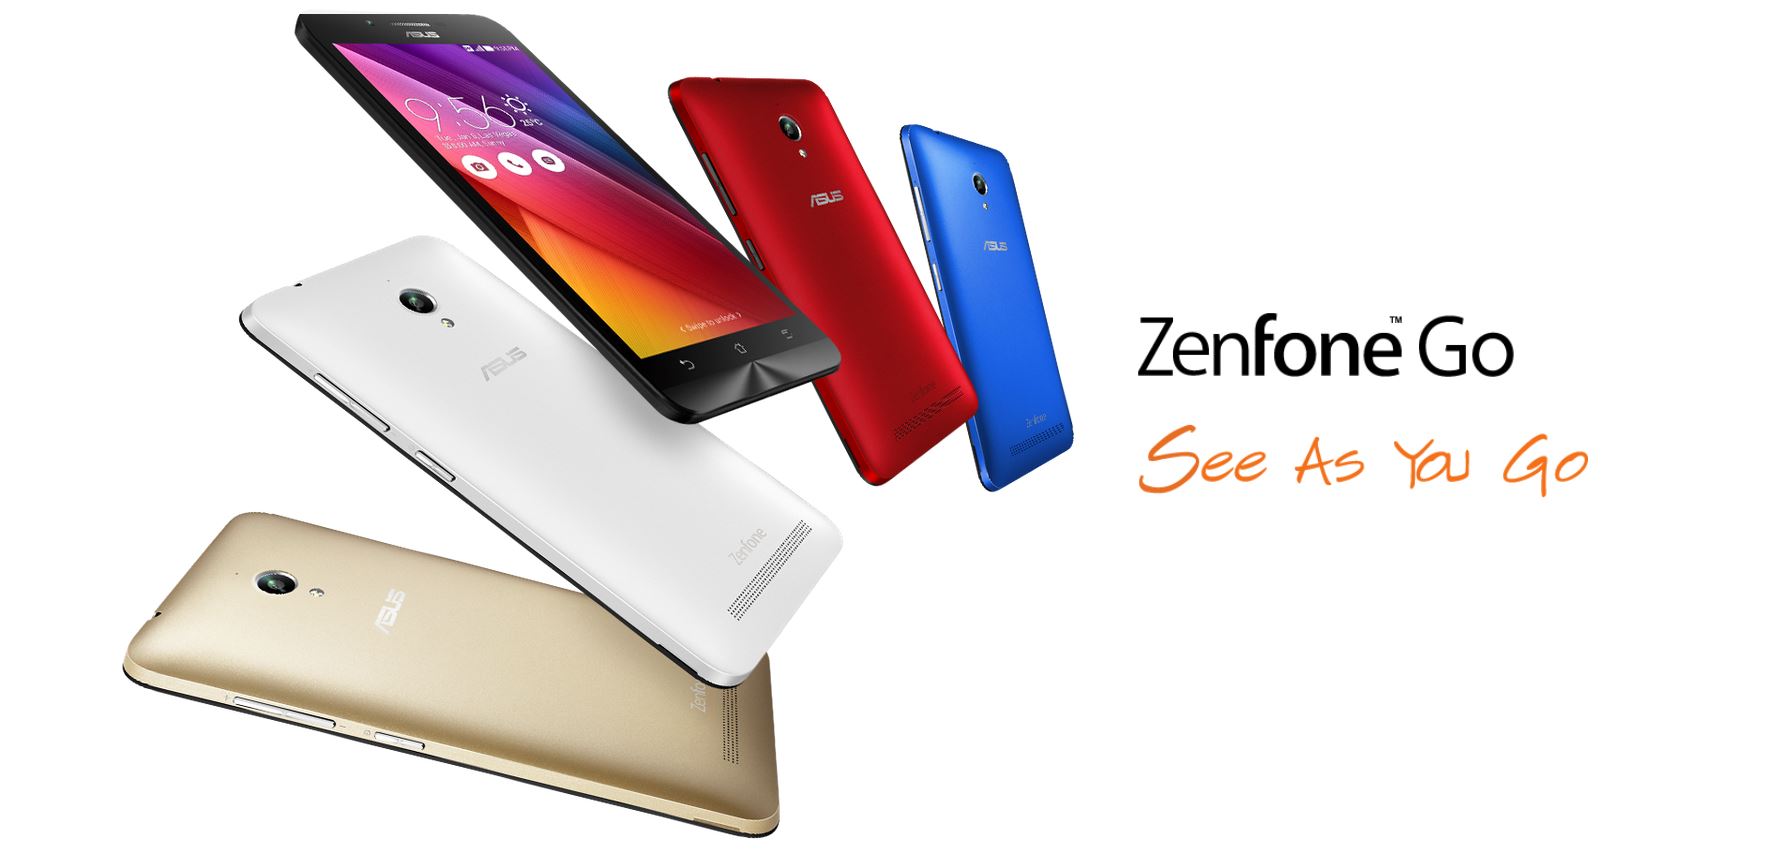 ASUS Zenfone GO is now available in ASUS MY store 36